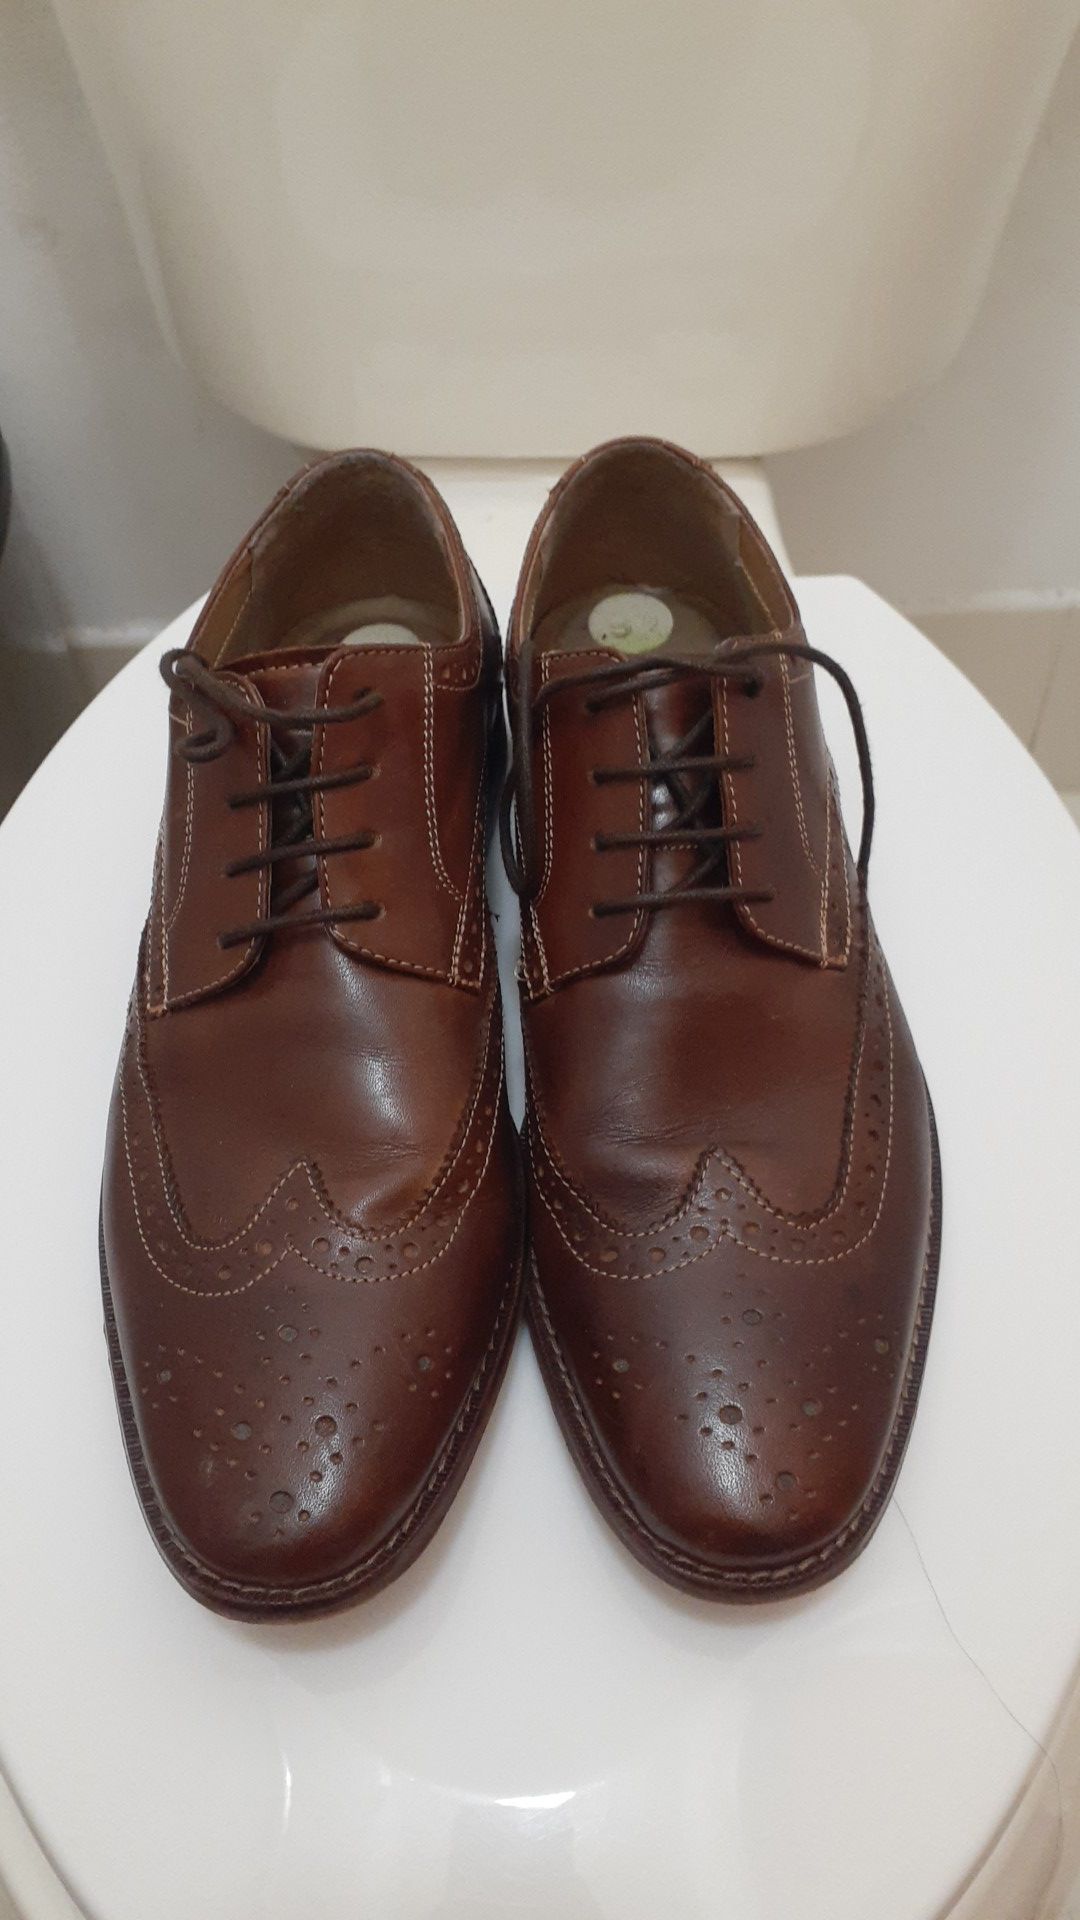 Mens Florsheim Shoes Size 9 1/2 for Sale in West Palm Beach, FL - OfferUp